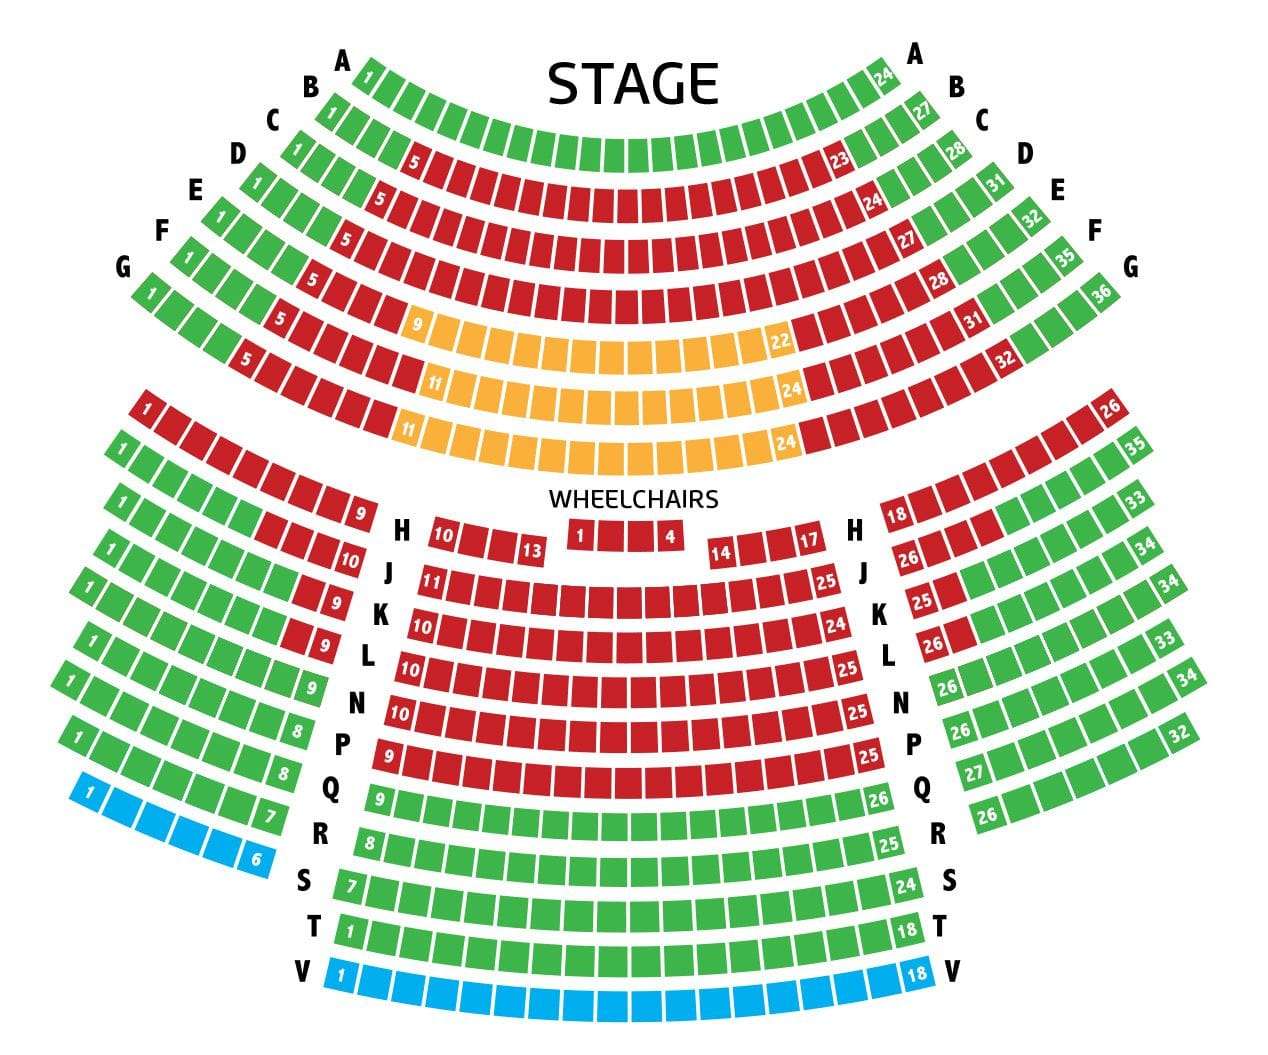 Pitlochry Theatre Seats